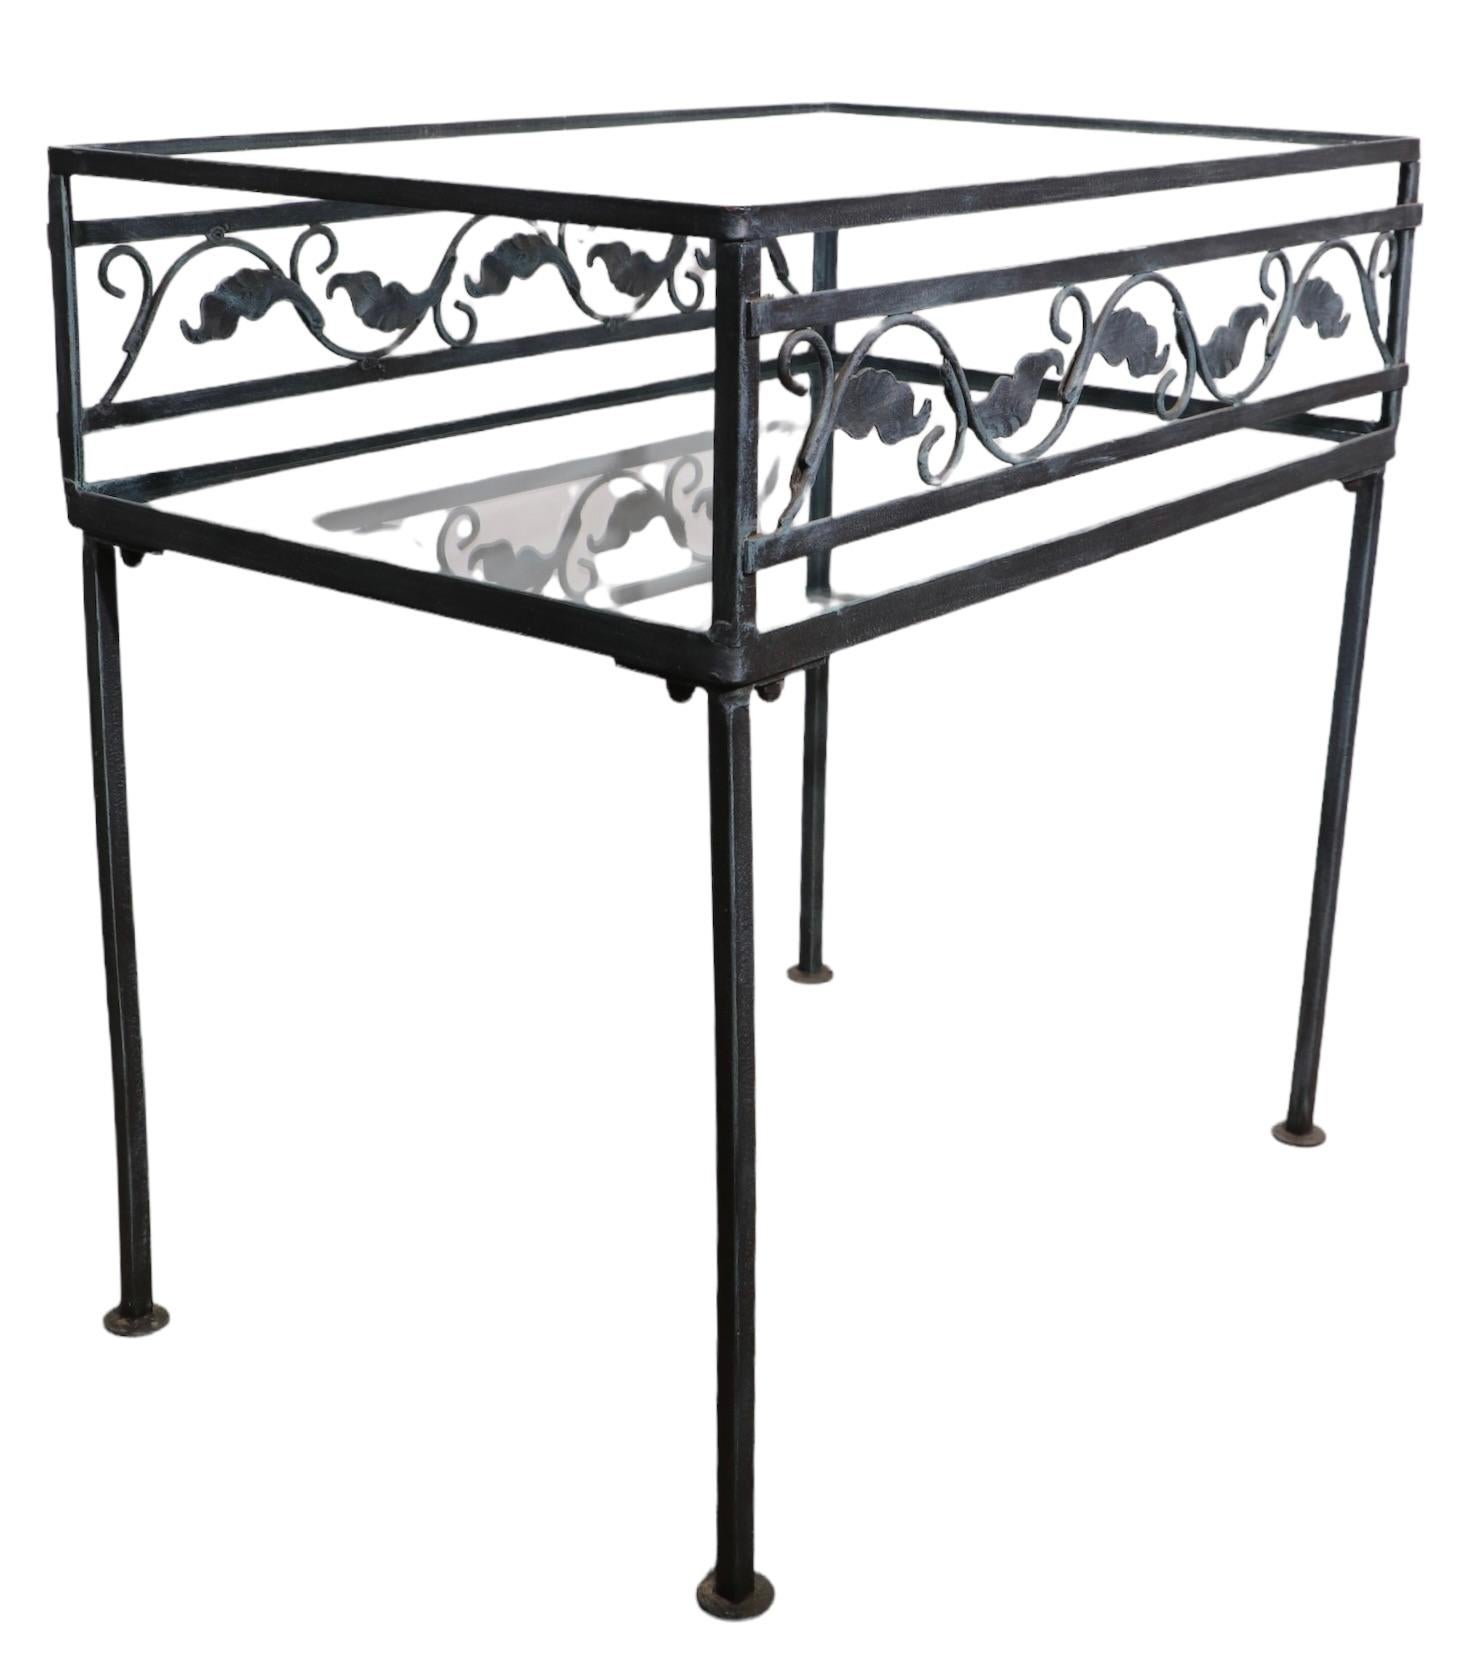 20th Century Wrought Iron and Glass Two Tier Garden Patio Table by Meadowcraft For Sale